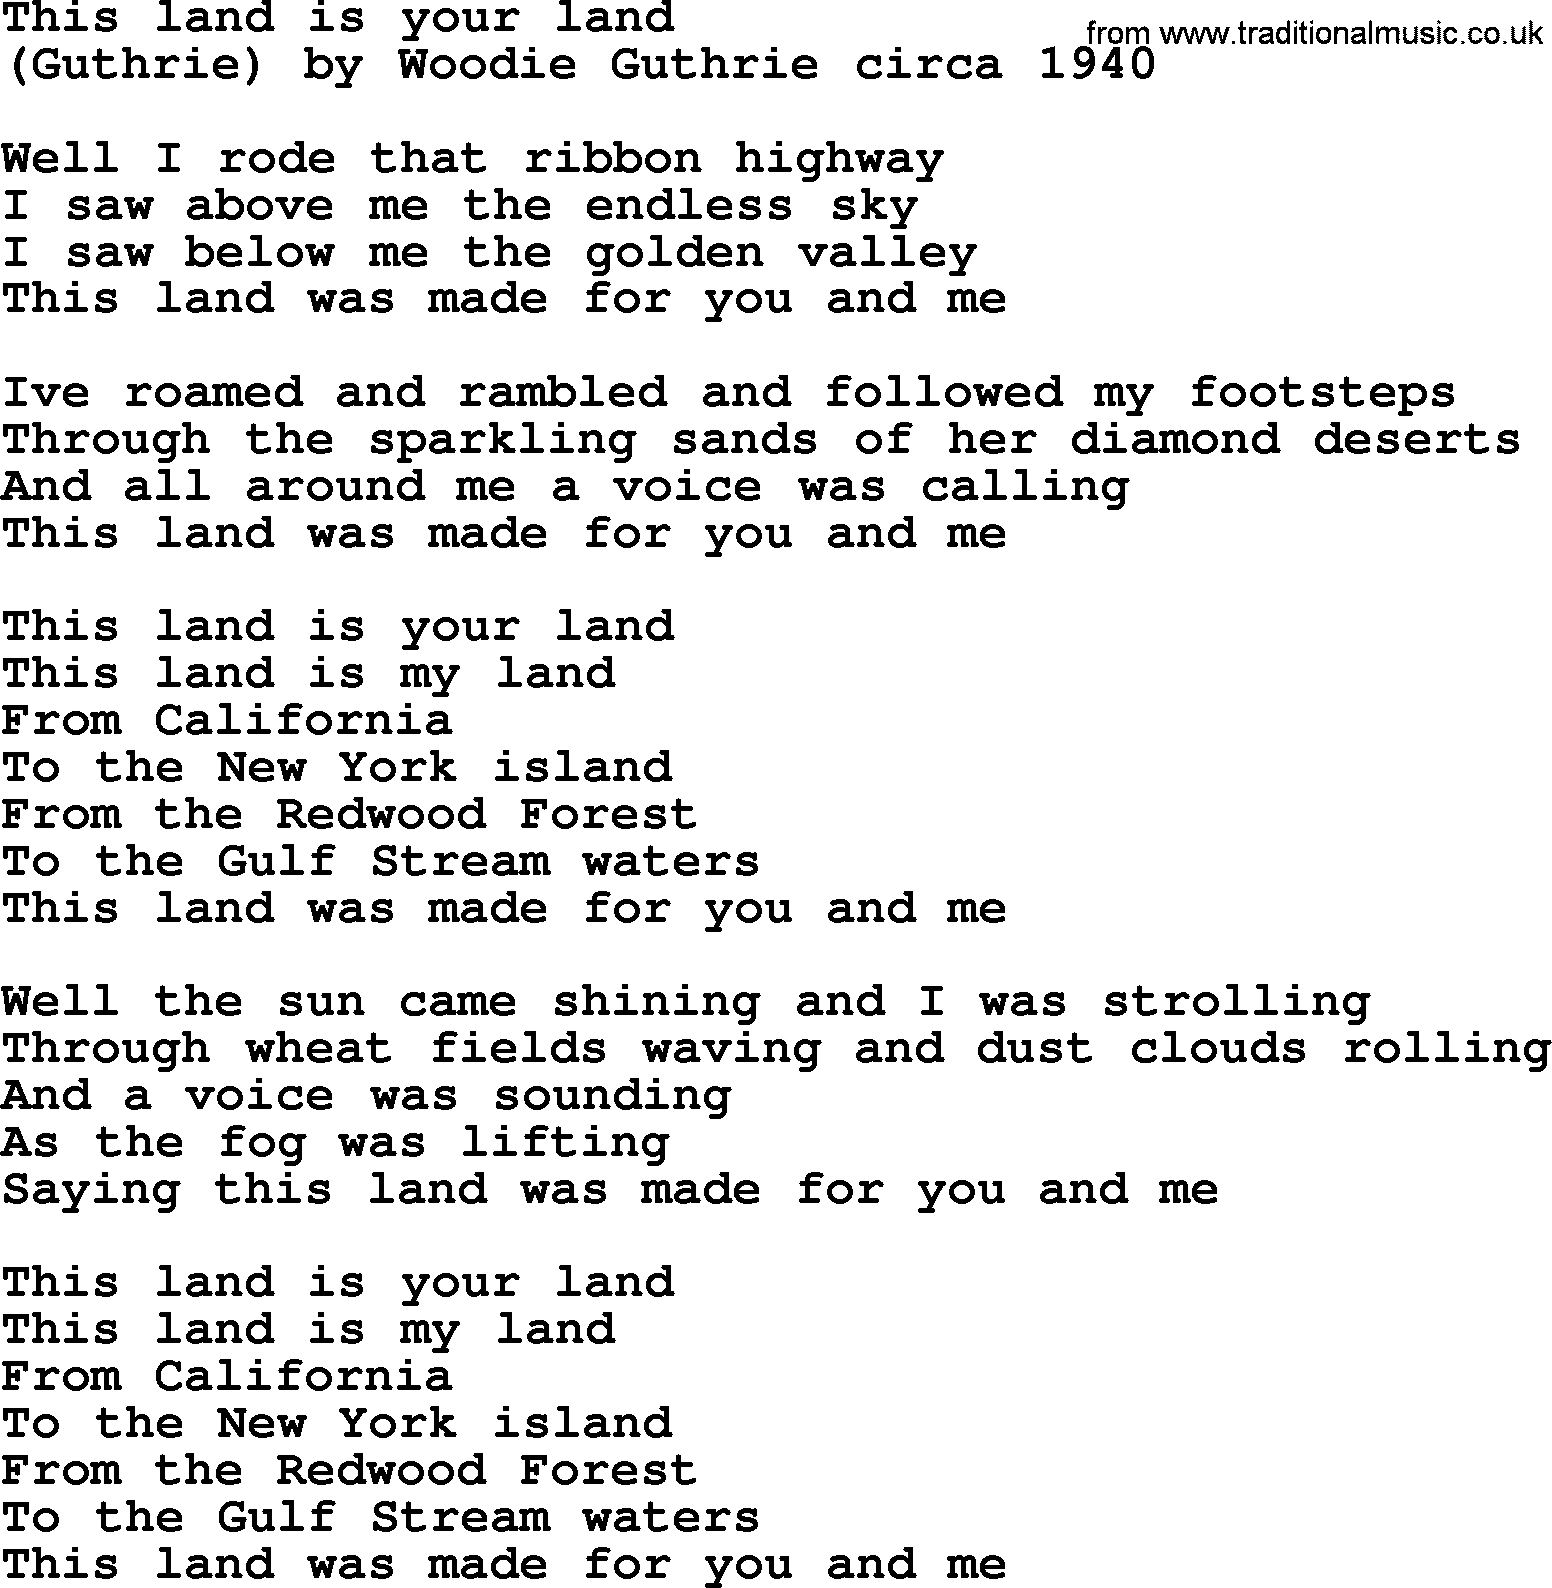 Bruce Springsteen song: This Land Is Your Land lyrics